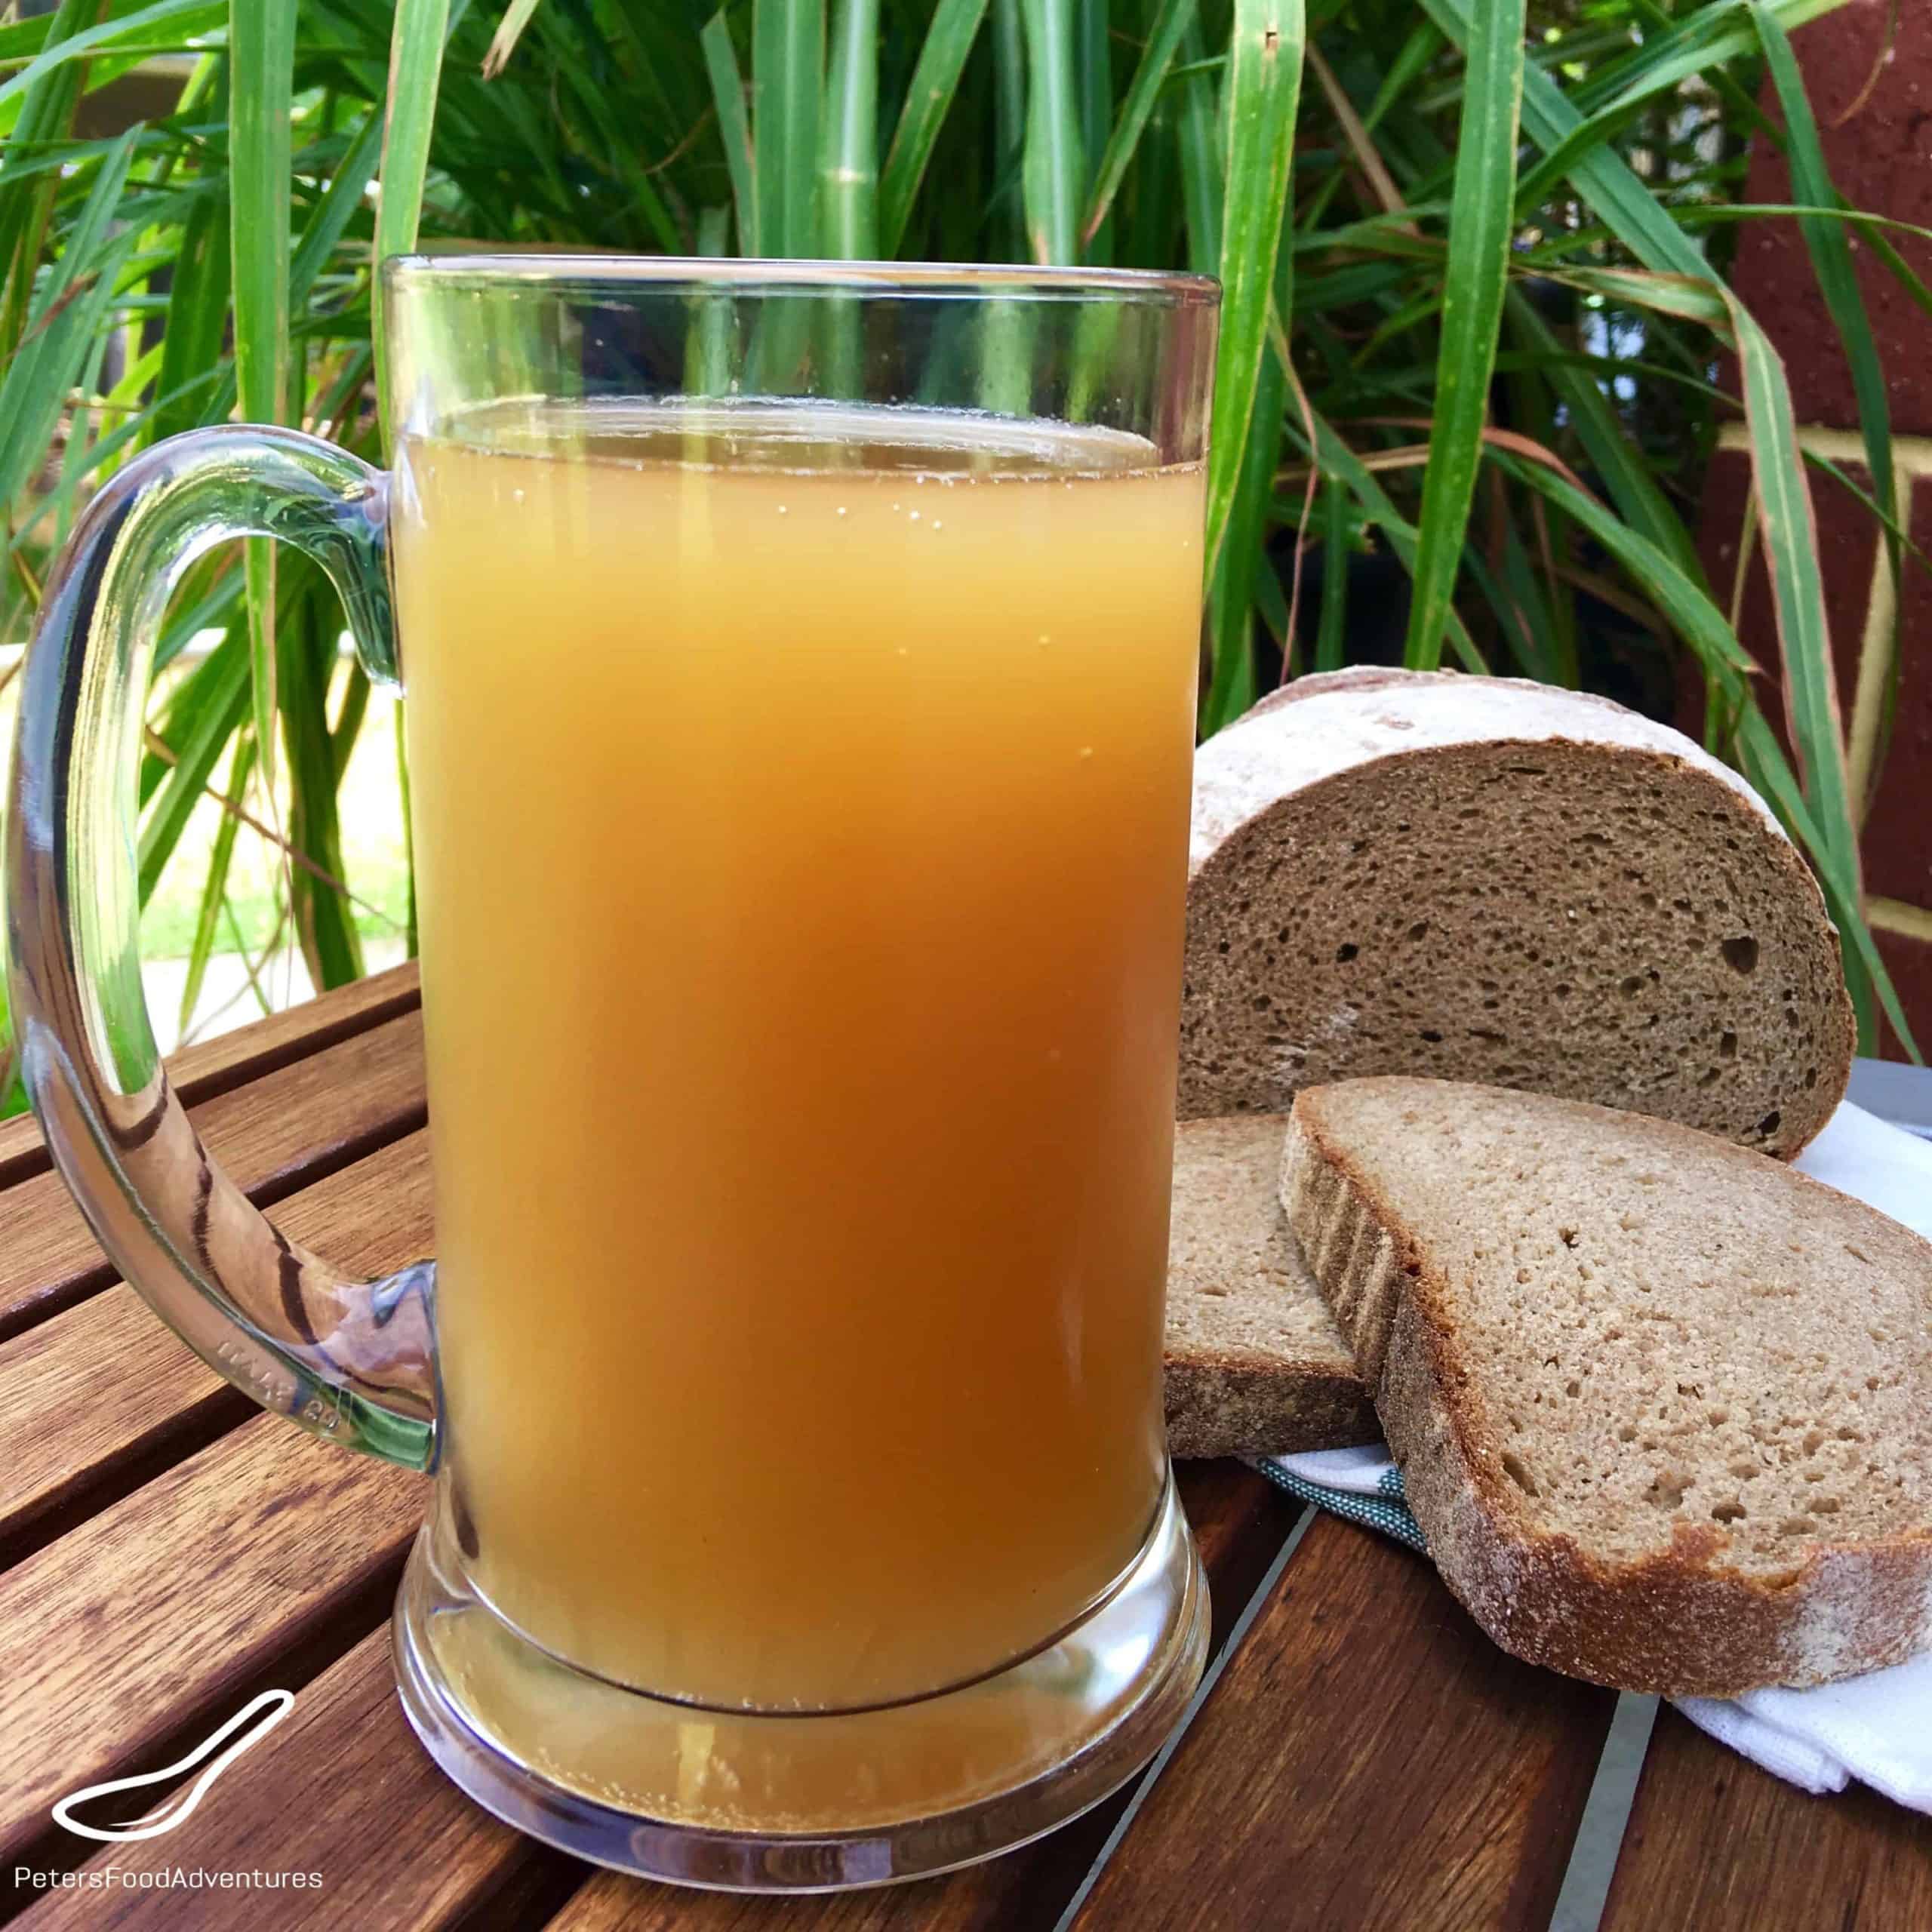 A refreshing Russian summer drink, naturally fermented, chemical free and delicious! Not beer, but this delicious Russian Kvass Recipe (Квас)